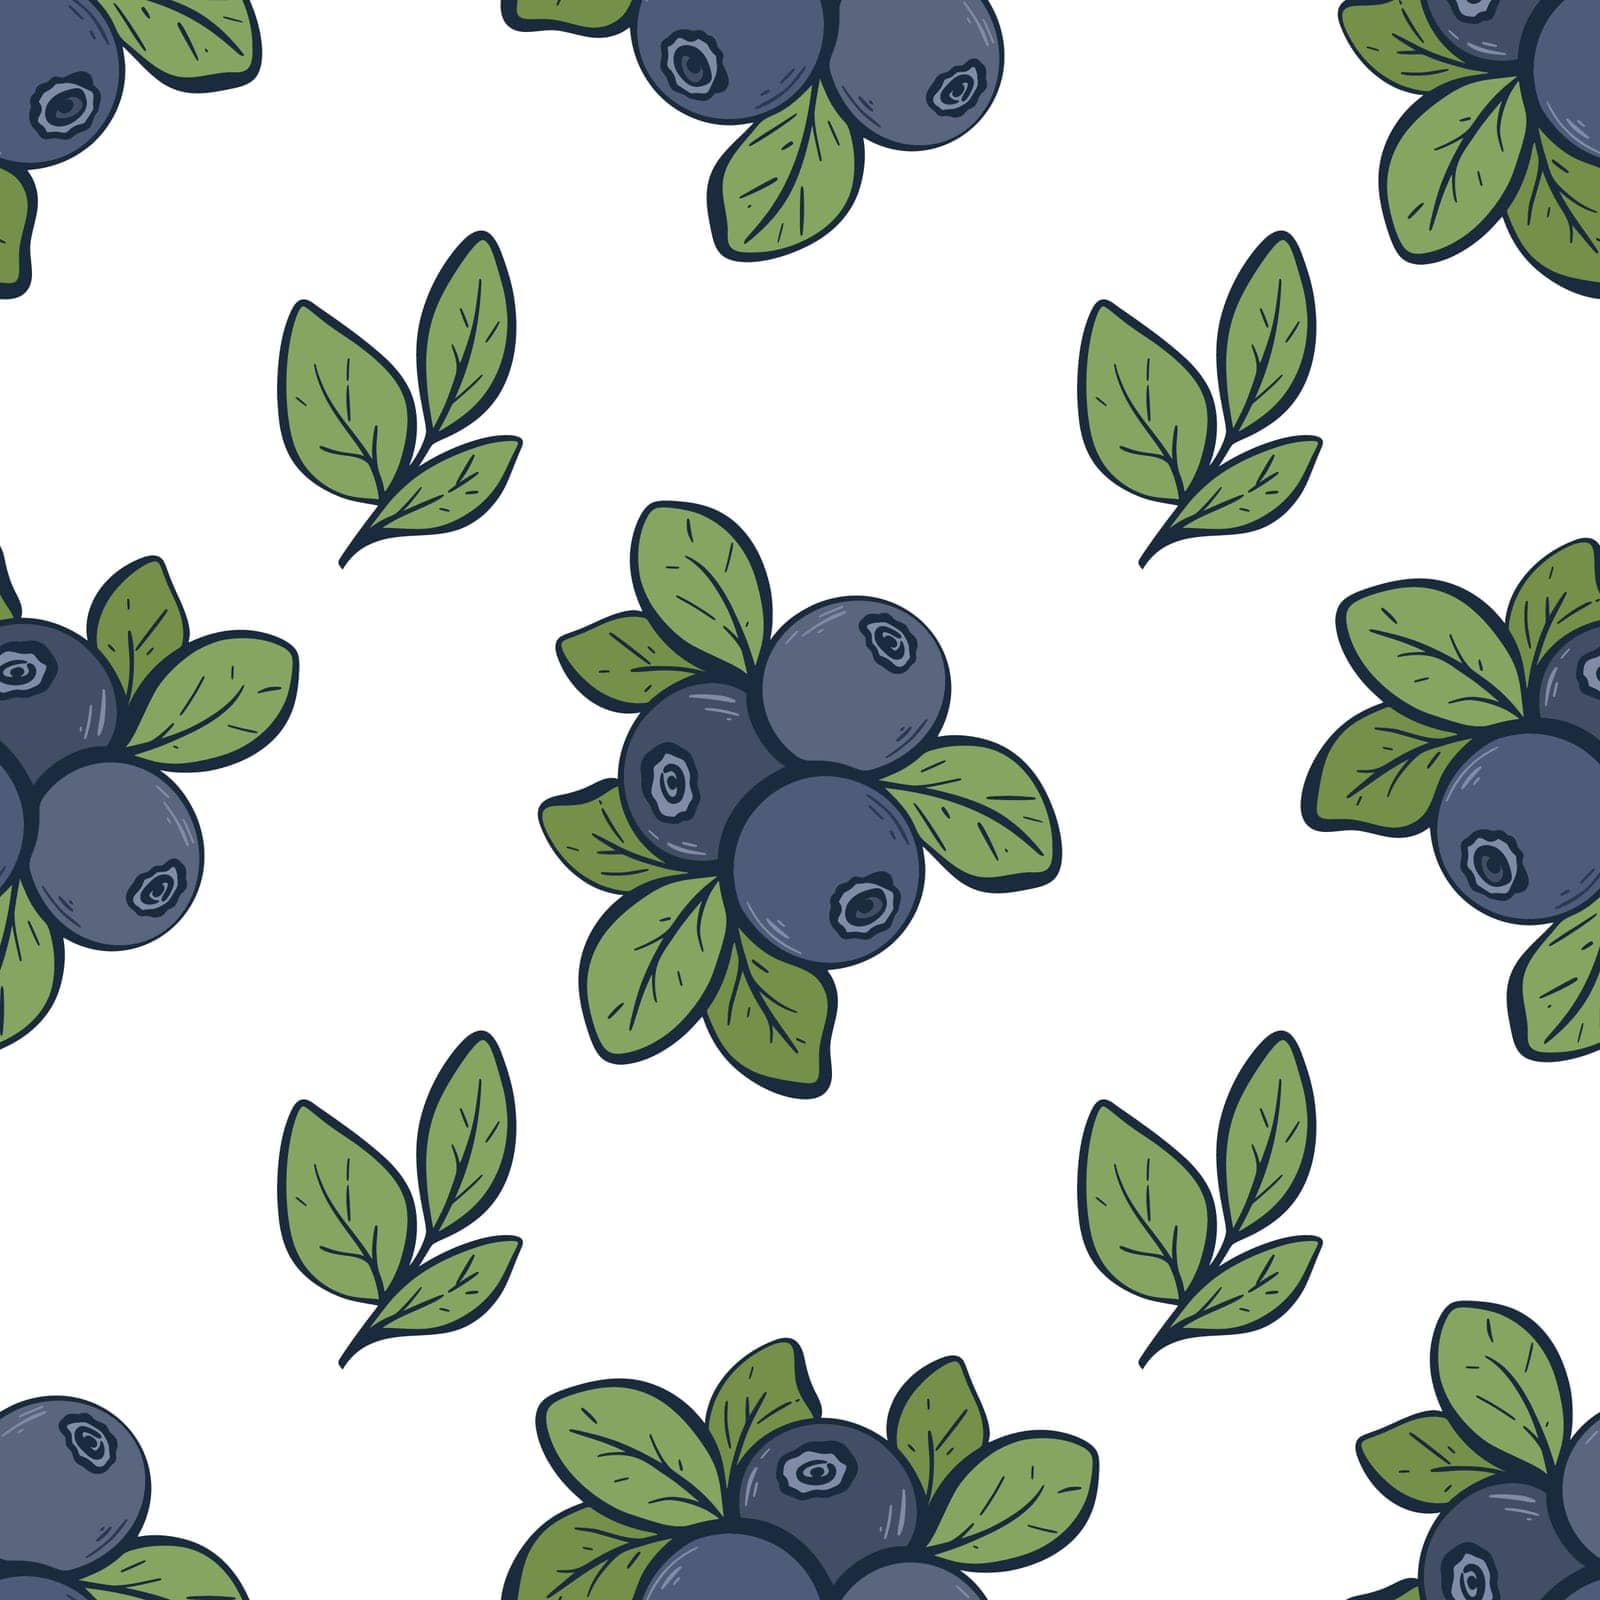 Fresh blueberries seamless pattern. Berry background. Organic healthy food ornament. Huckleberry print for textile, paper, packaging, design vector illustration